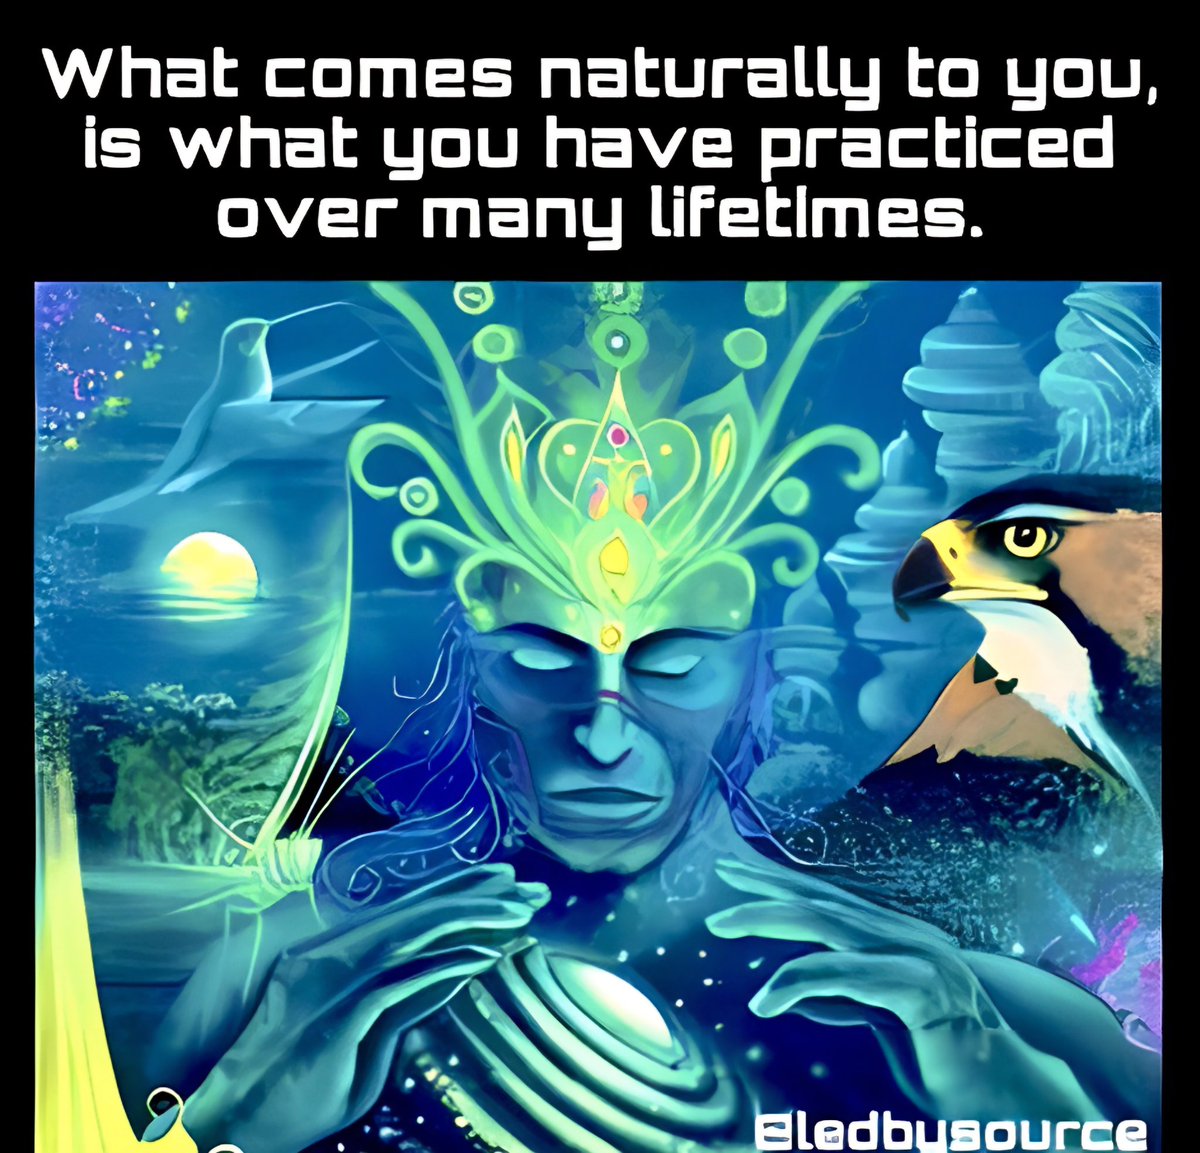 What comes naturally to you, is what you have practiced over many lifetimes.